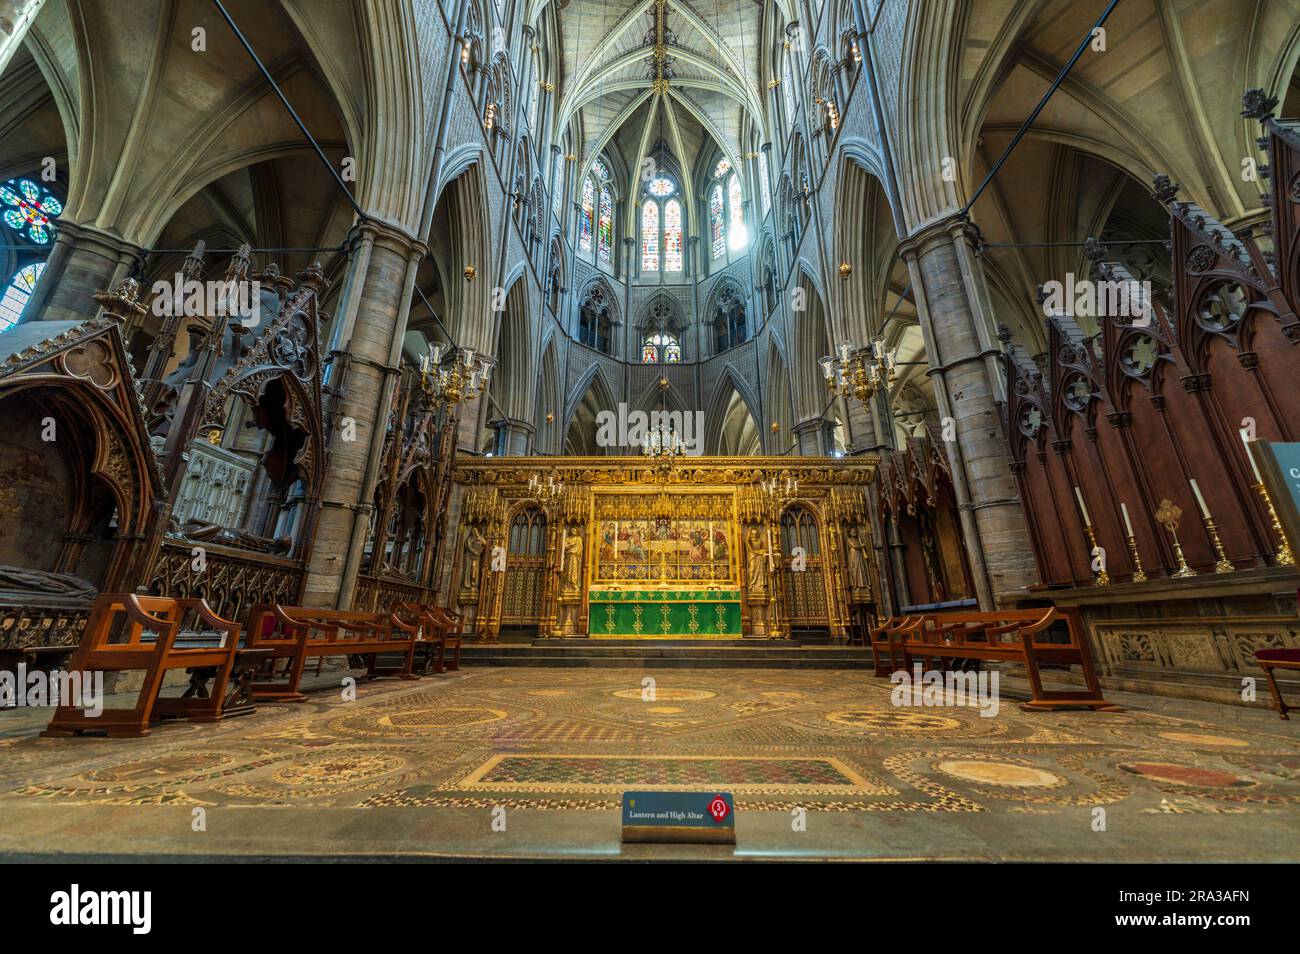 The High Altar inside the gothic Westminster Abbey. The Coronation Chair, where the monarch sits, is placed facing the High Altar during coronations. Stock Photo